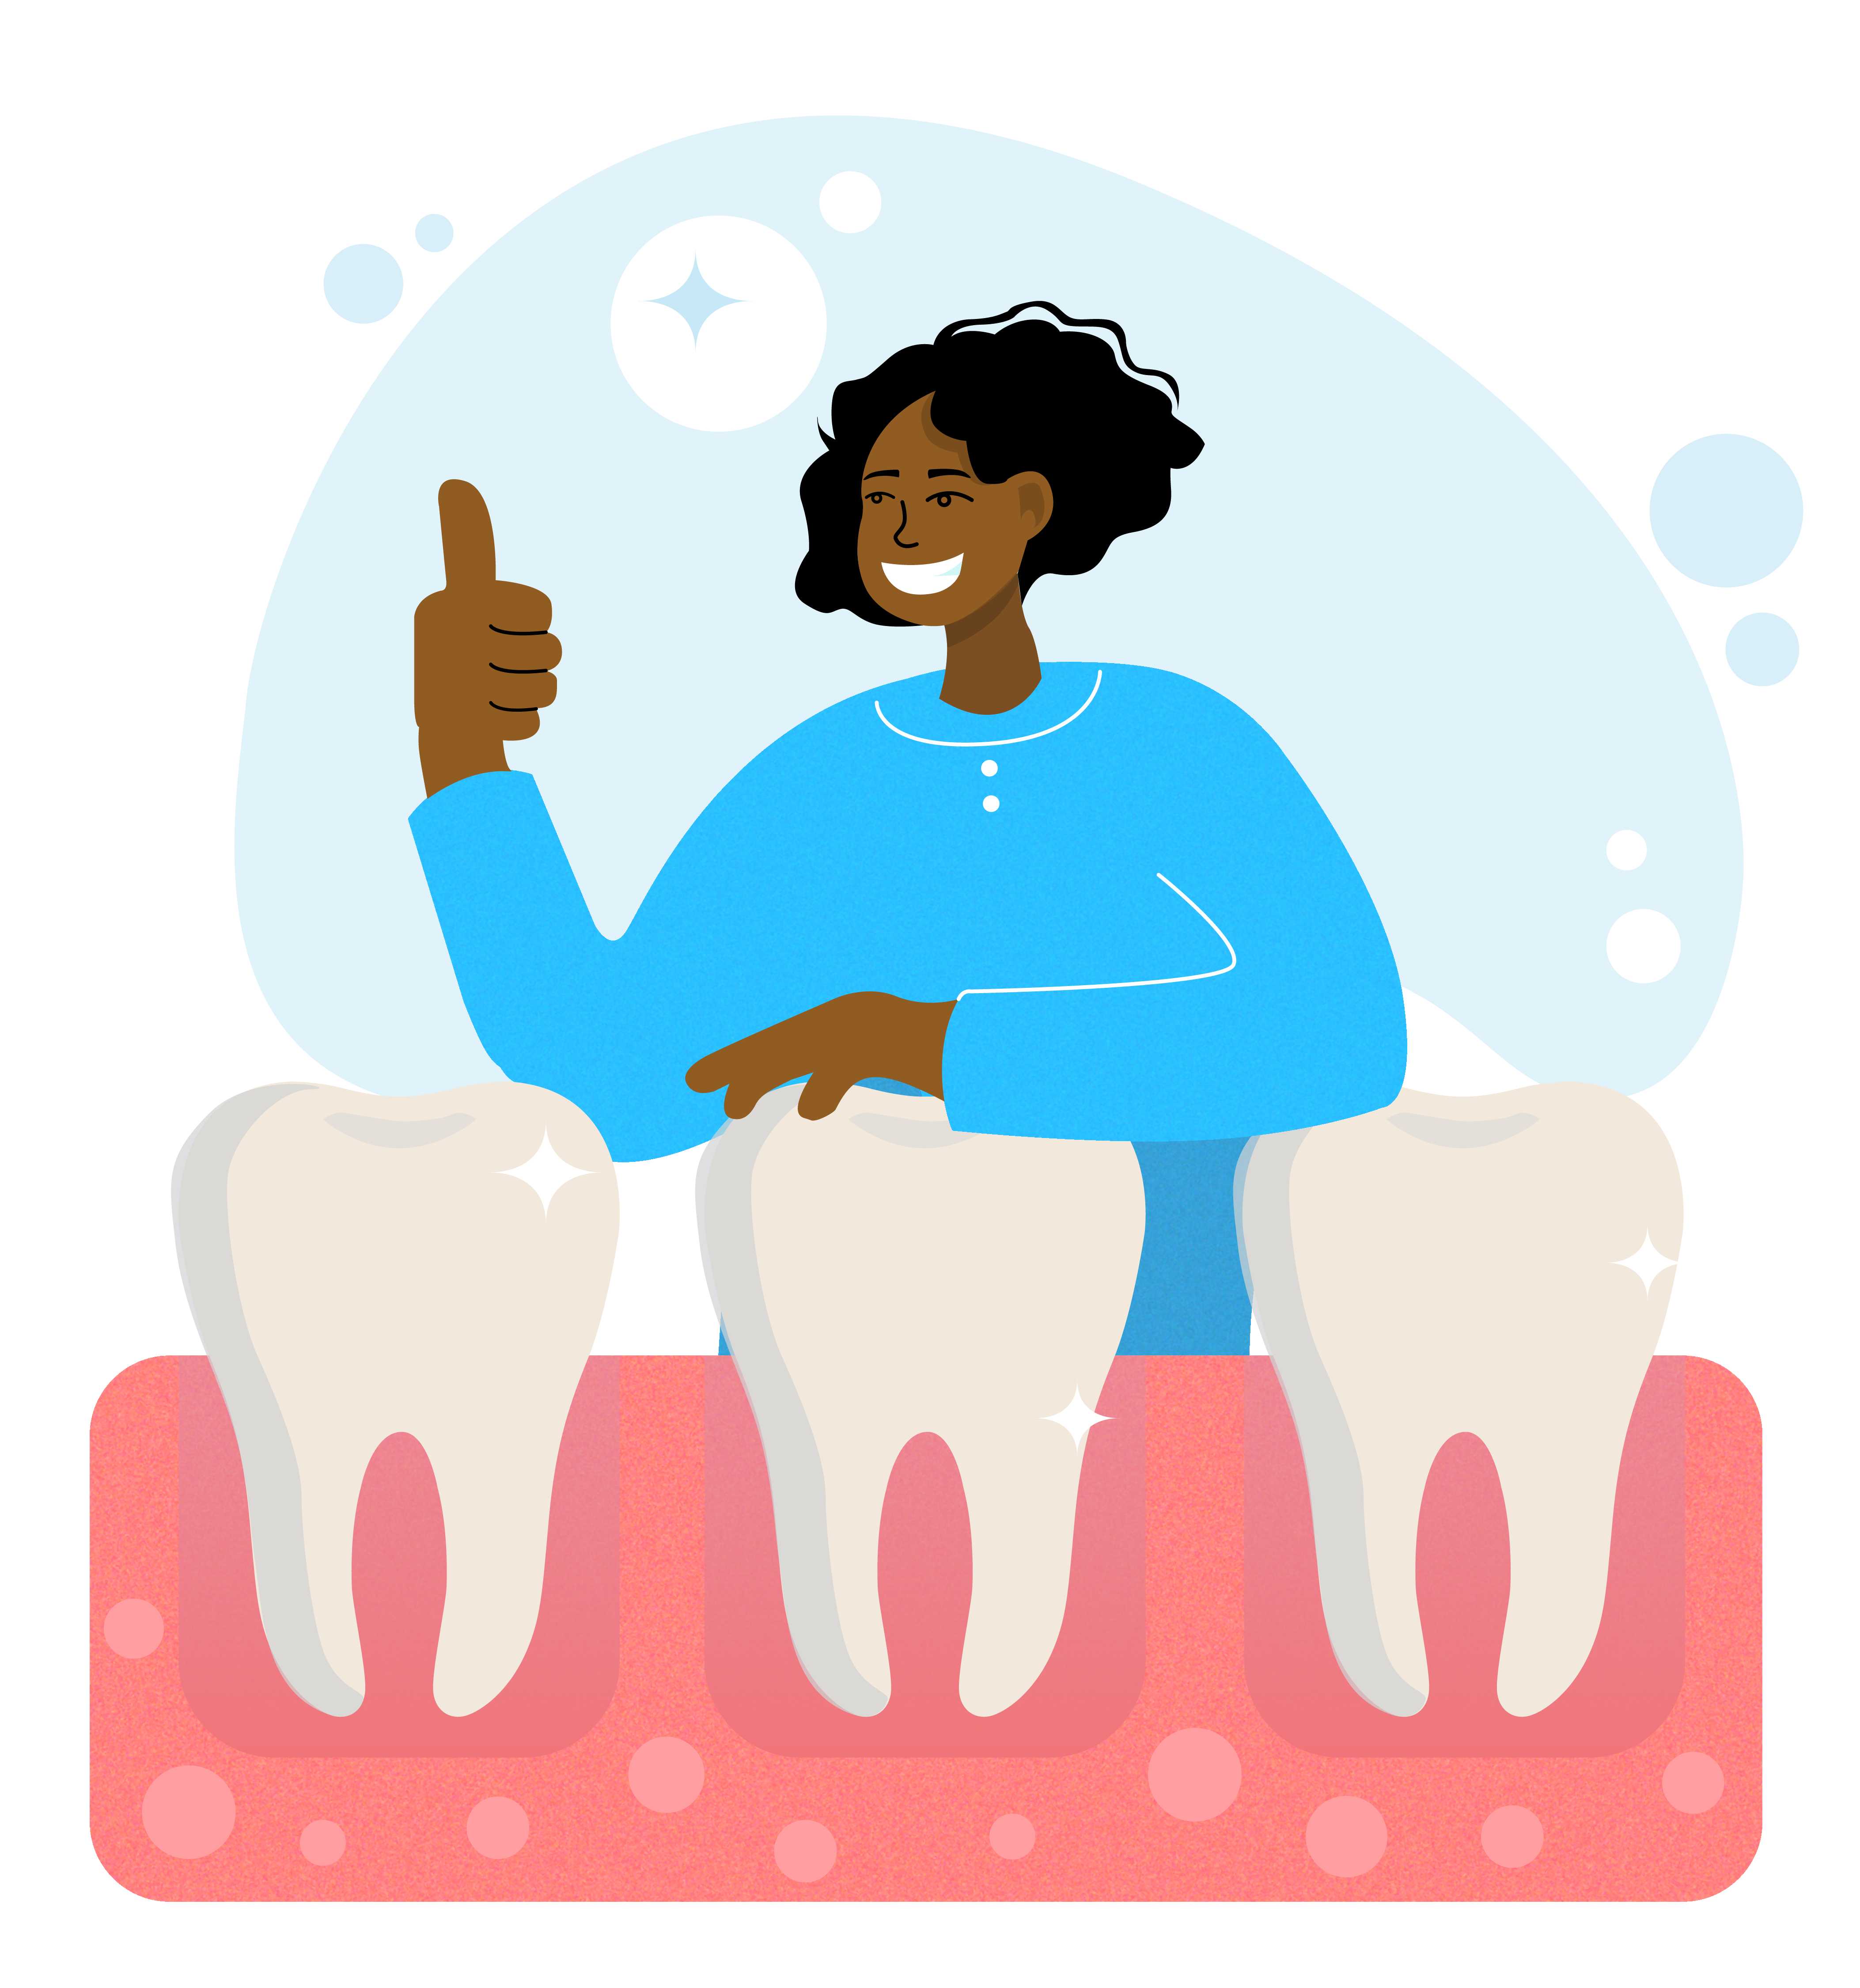 Illustration of smiling woman giving a thumbs up while standing behind 3 giant teeth and gums